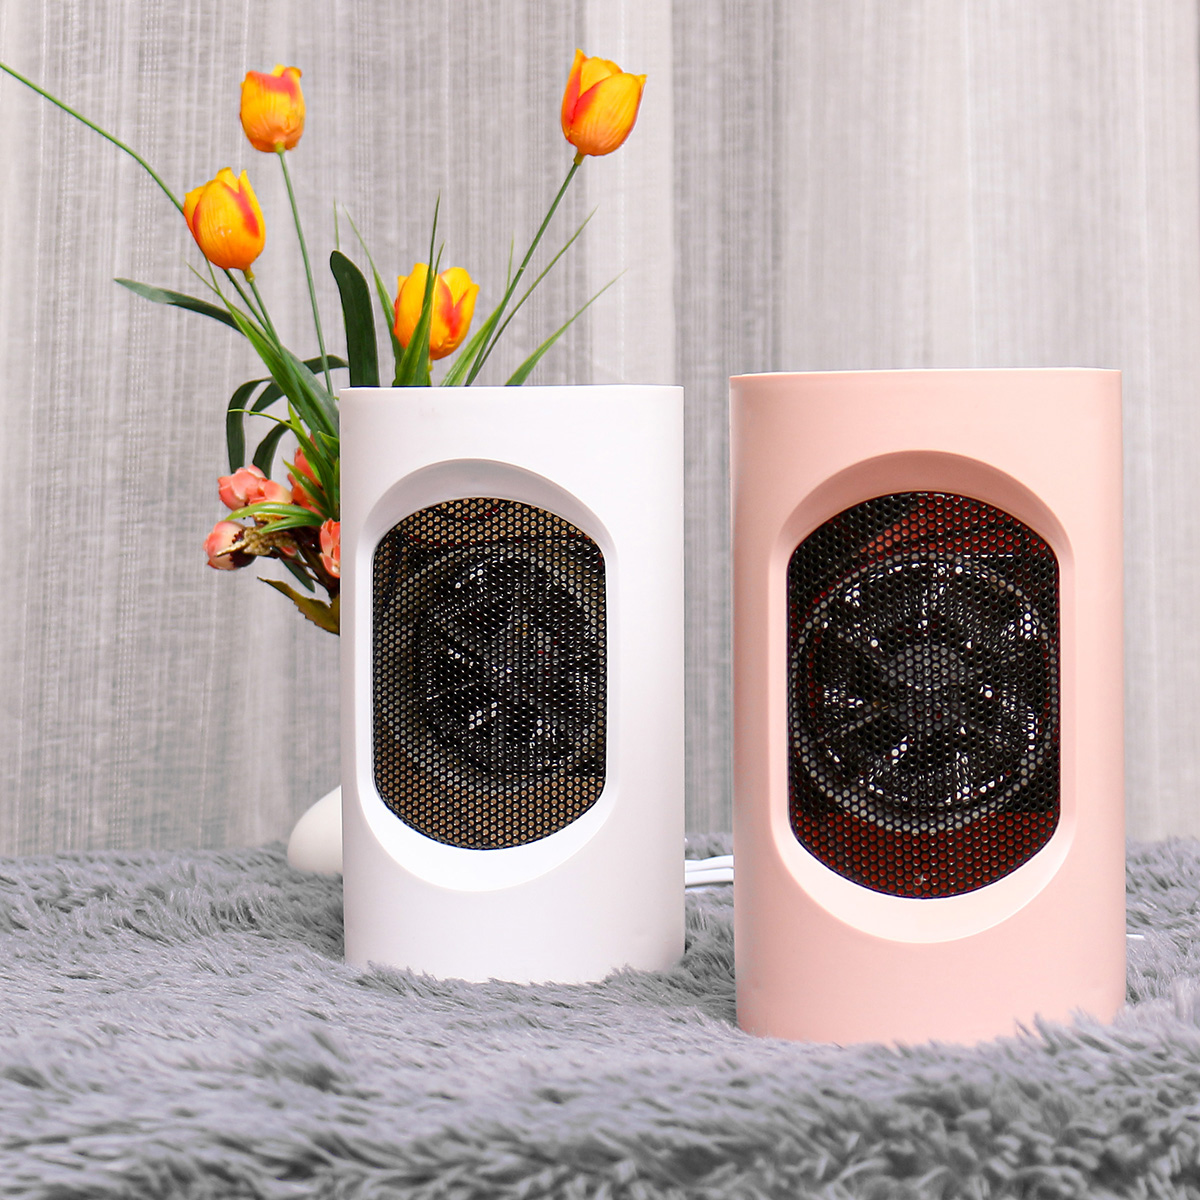 

500W Mini Electric Heater Winter Space Warmer Heating Home Office Dormitory Heater Air Machine